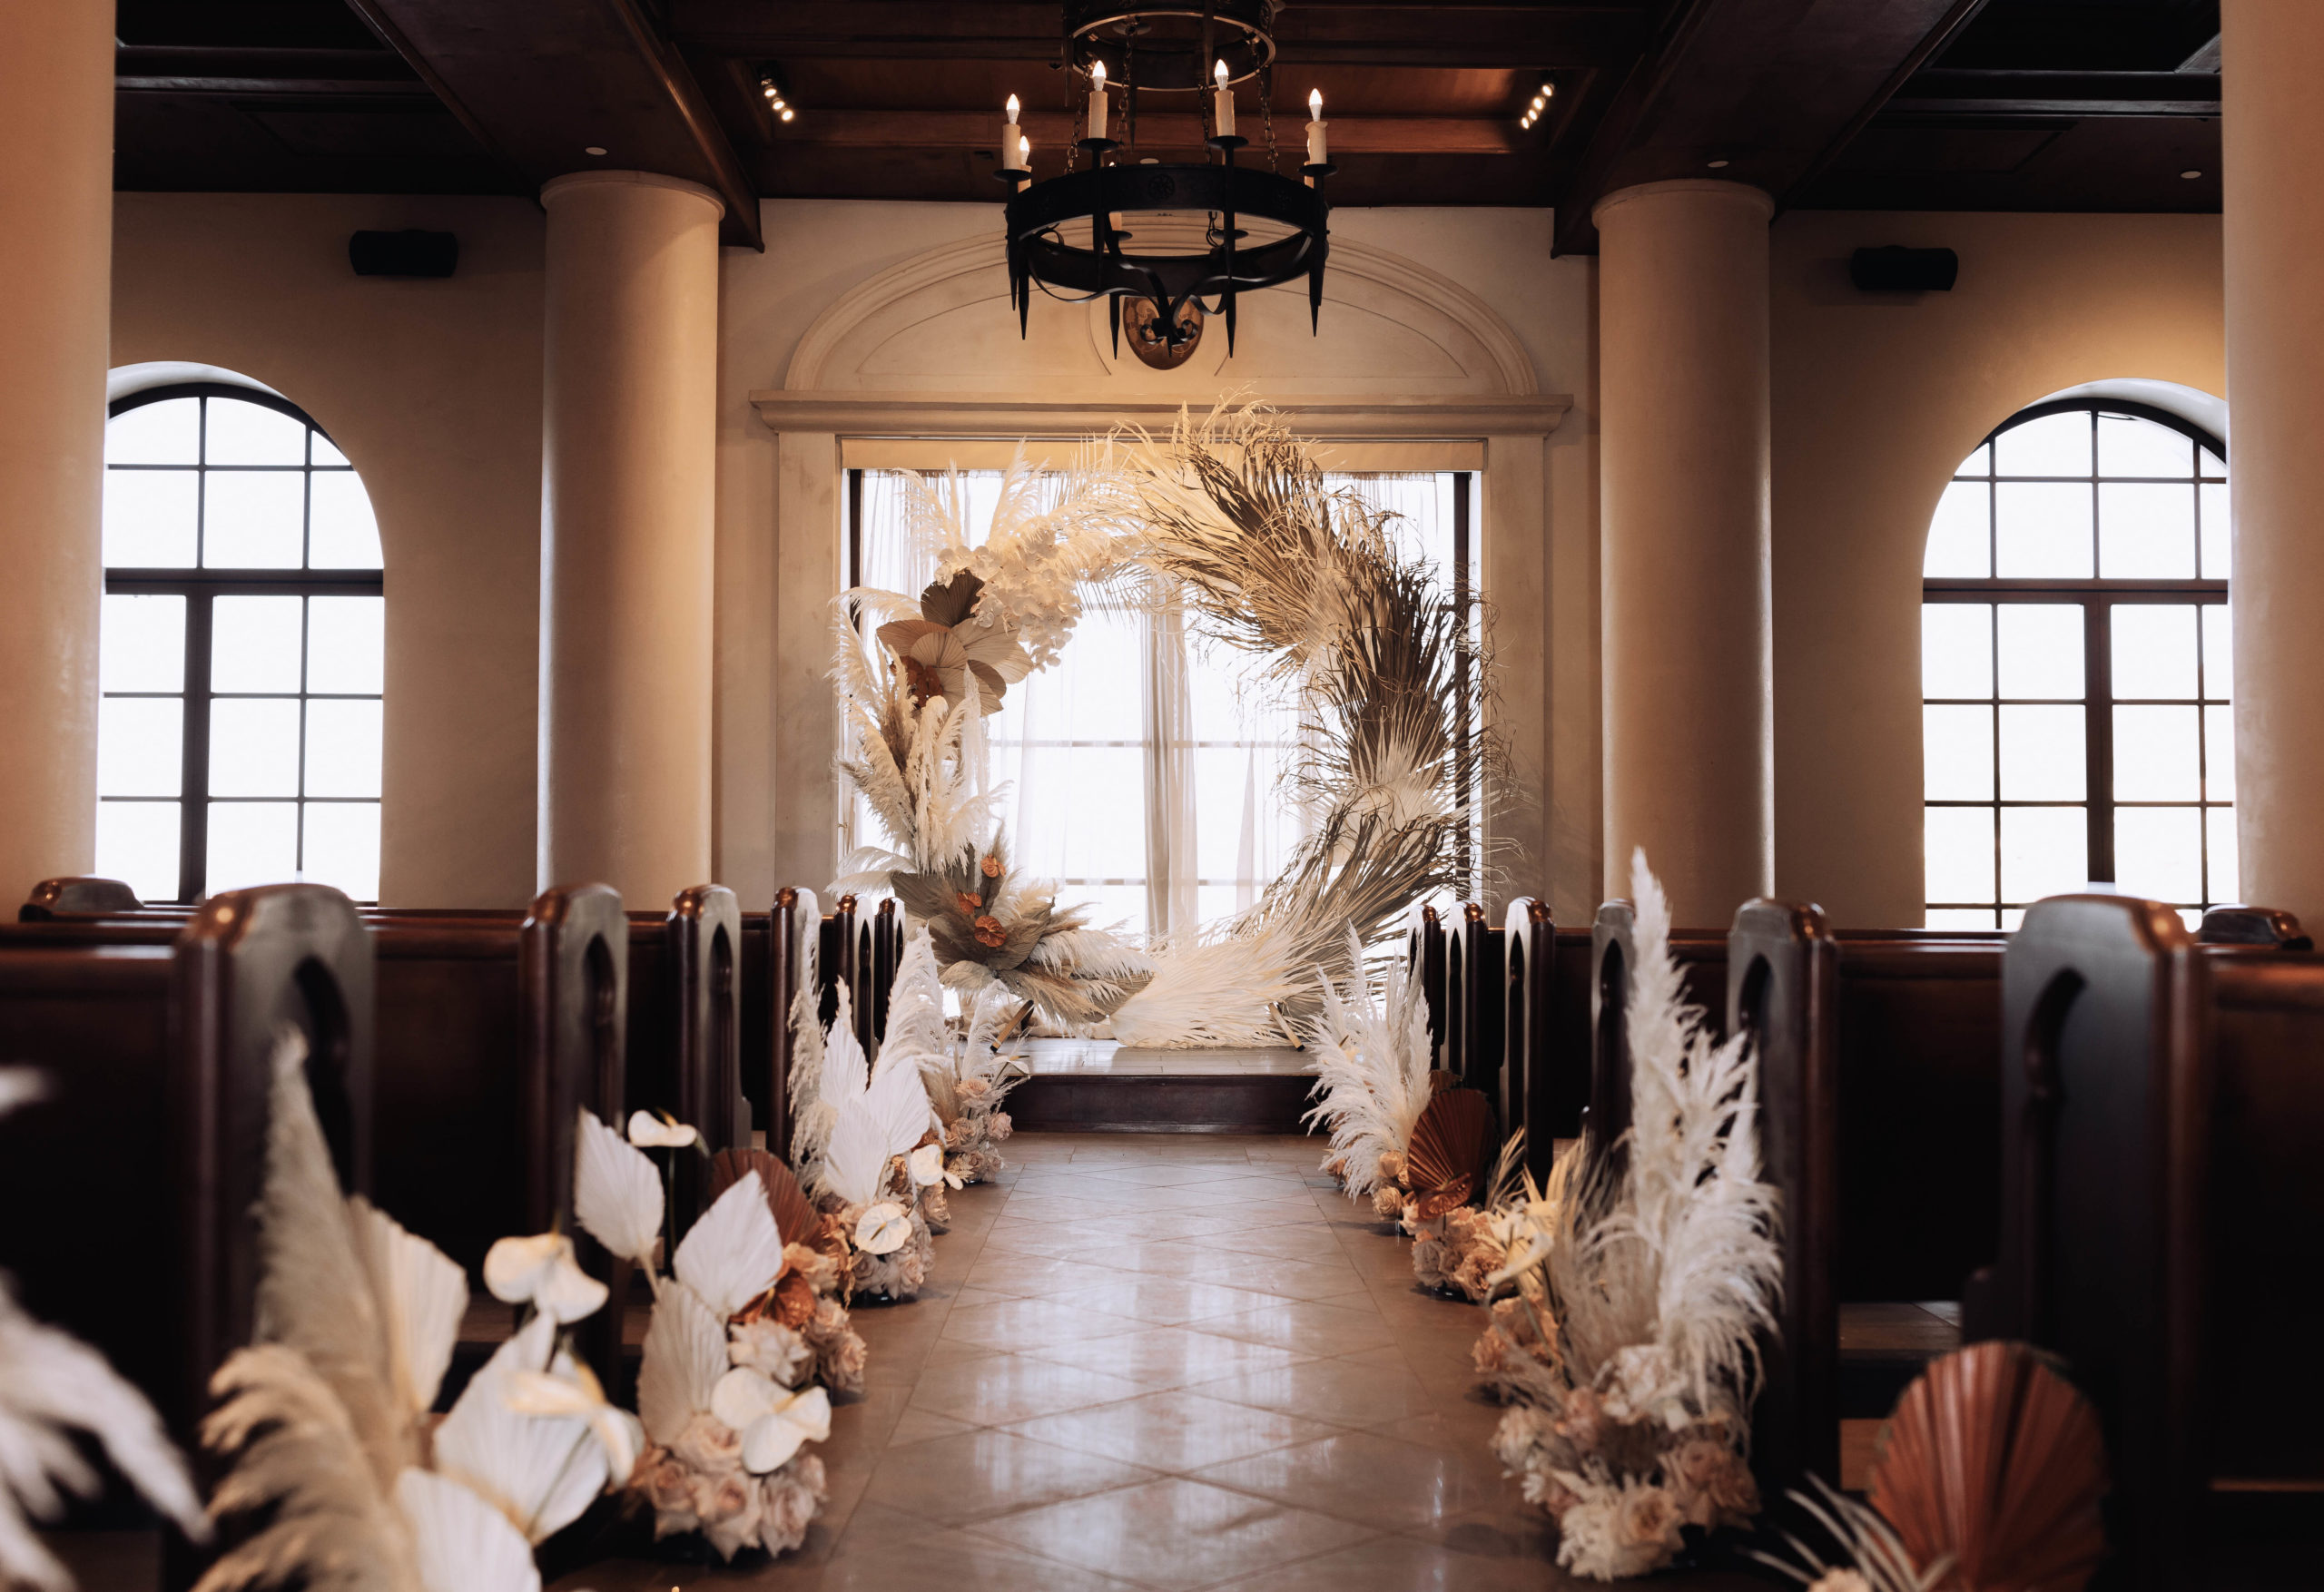 Lake Las Vegas Meets Modern Boho Bride. The Hilton of Lake Las Vegas wedding chapel. Boho circular arch covered in dried floral arrangements. Flowers placed down the aisle at every pilar.  